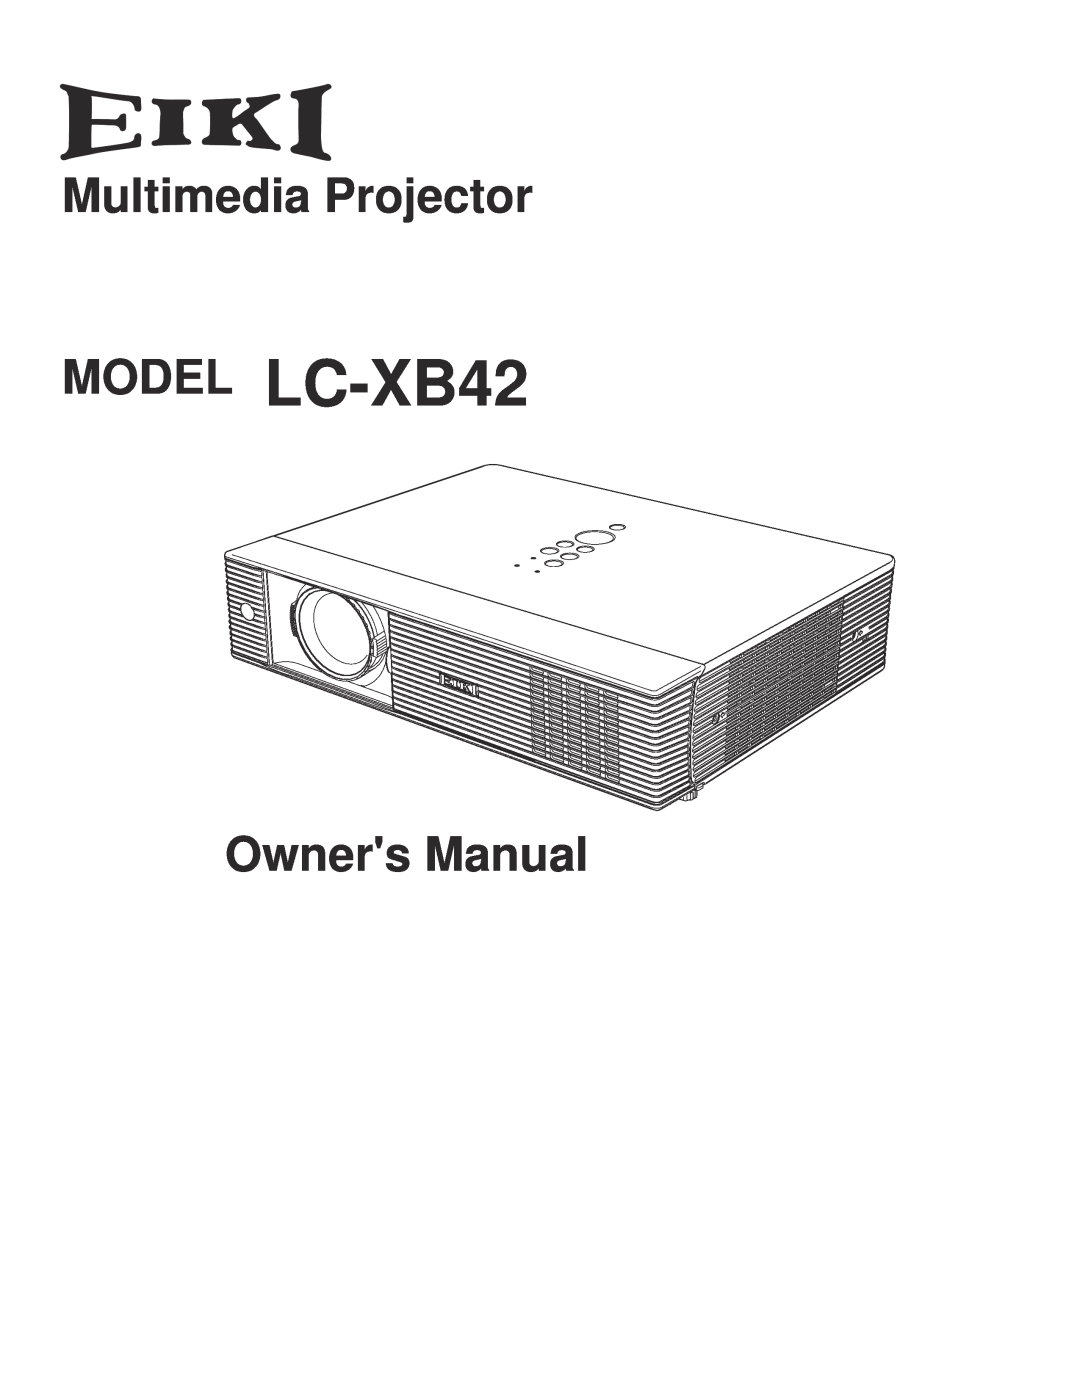 Eiki owner manual MODEL LC-XB42, Multimedia Projector, Owners Manual 